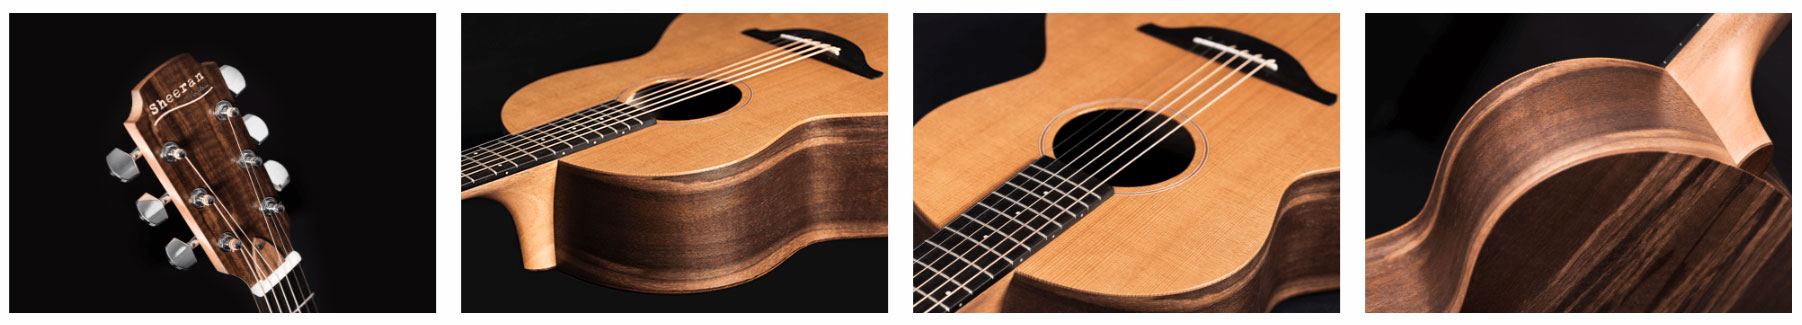 Sheeran By Lowden S01 Orchestra Model Cedre Noyer Eb +housse - Natural Satin - Acoustic guitar & electro - Variation 2